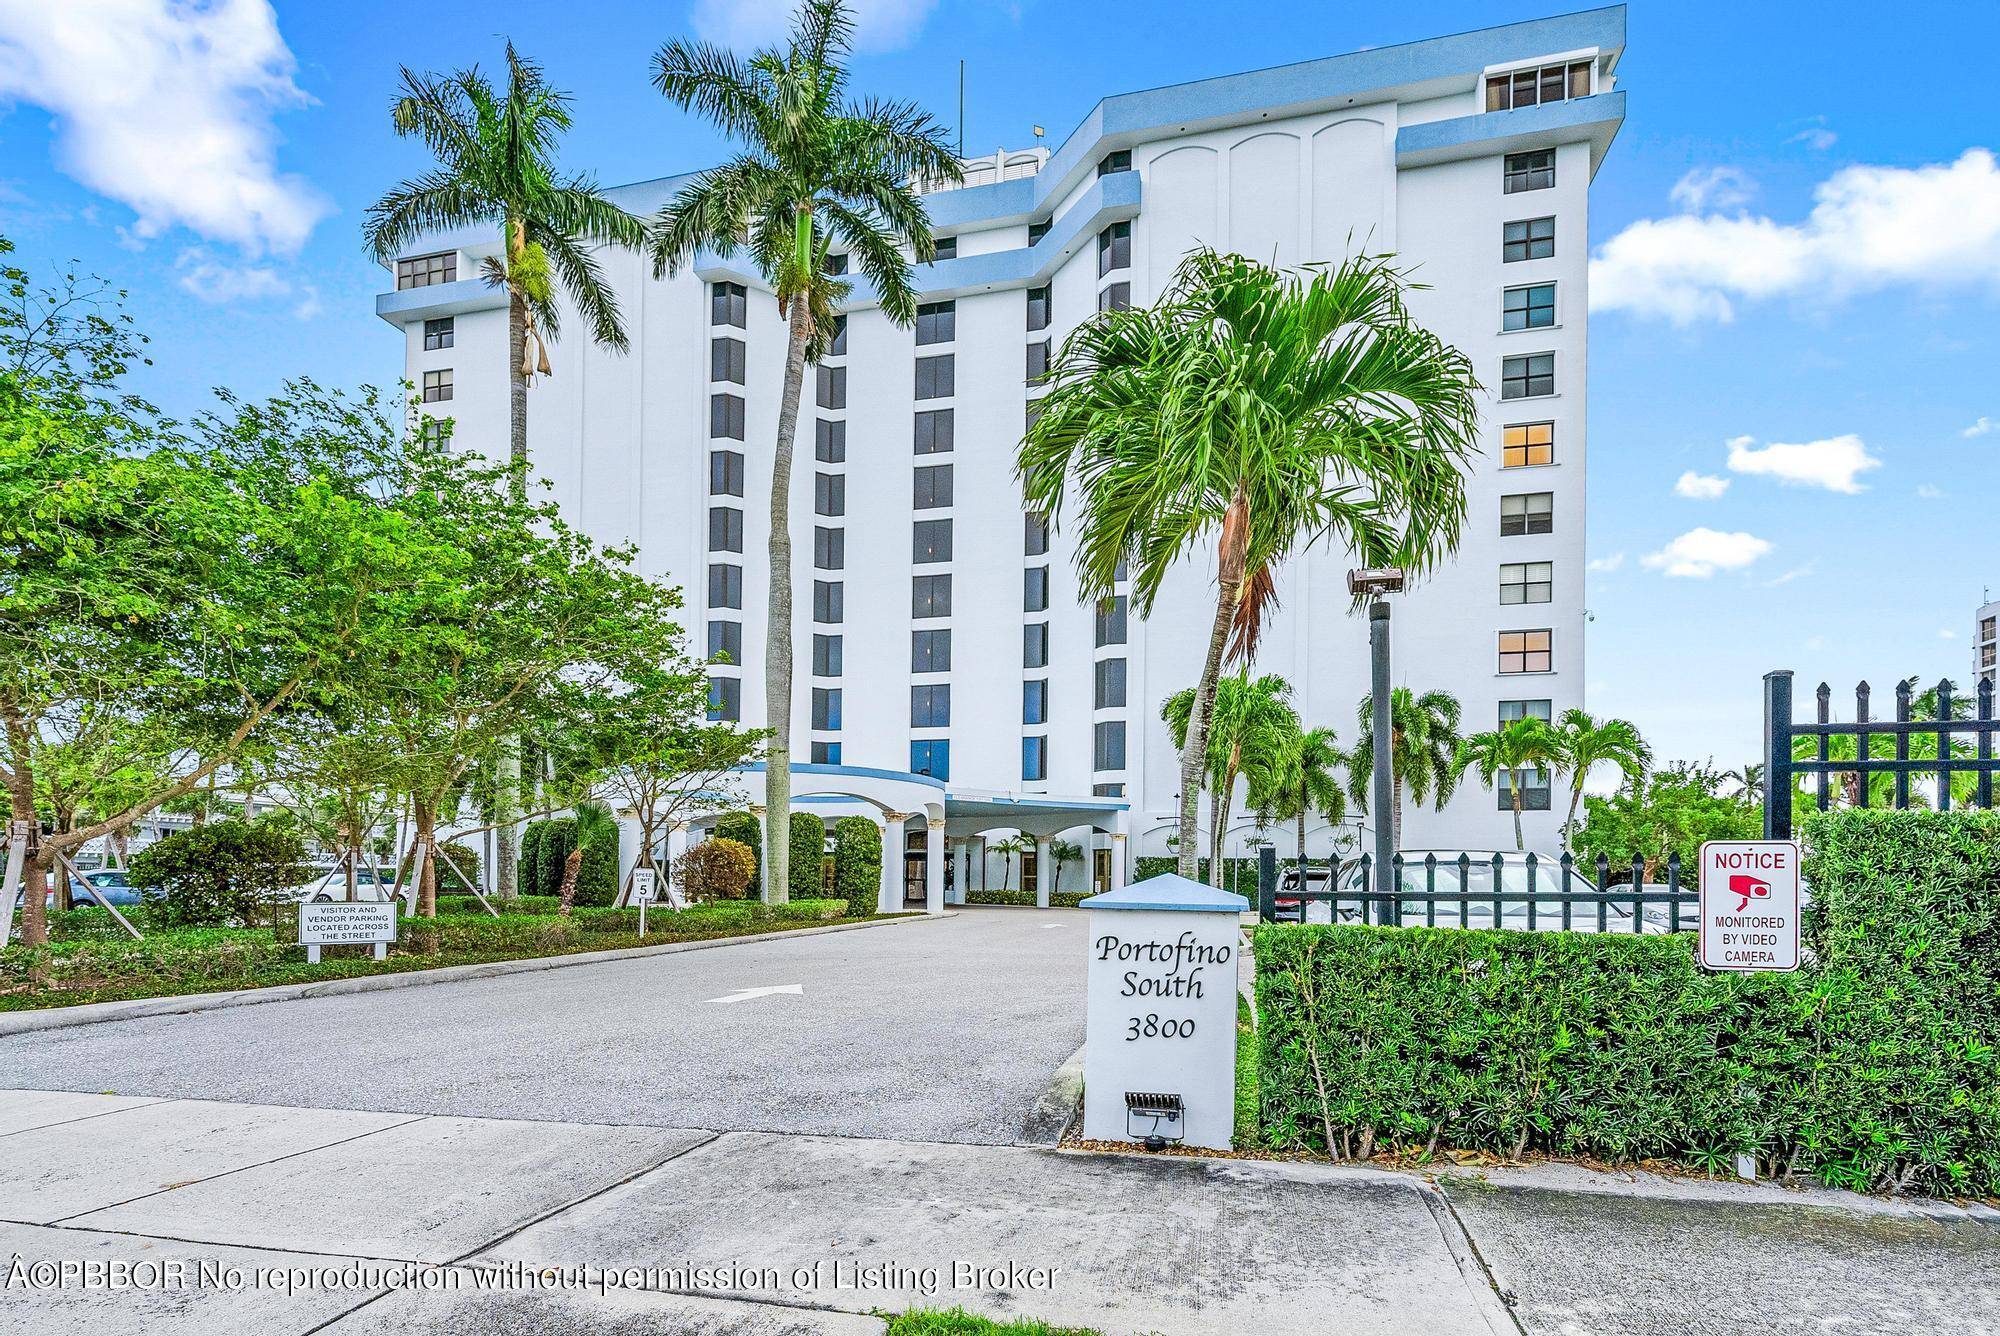 Wonderfully located along the intra coastal's Flagler Drive is this beautiful, bright and spacious 1BRD 1.